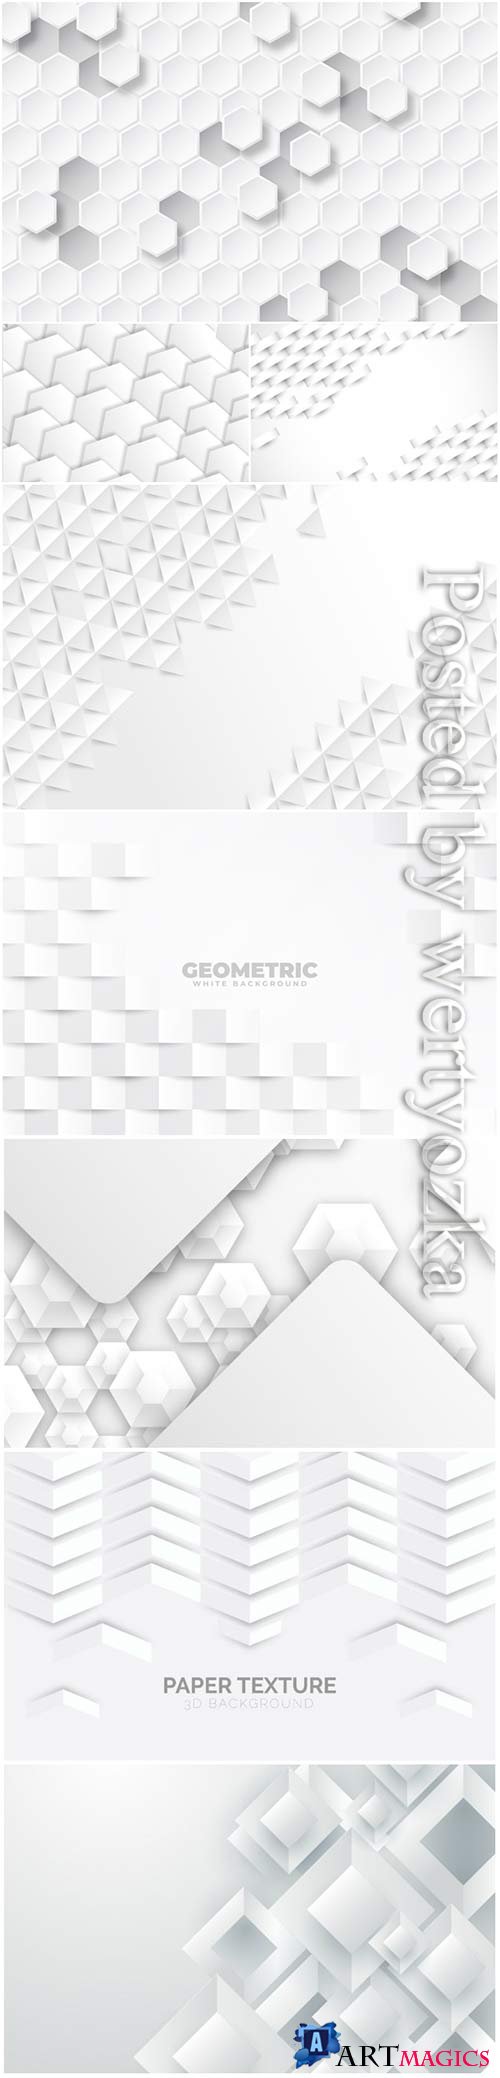 Abstract vector background, 3d models template # 2